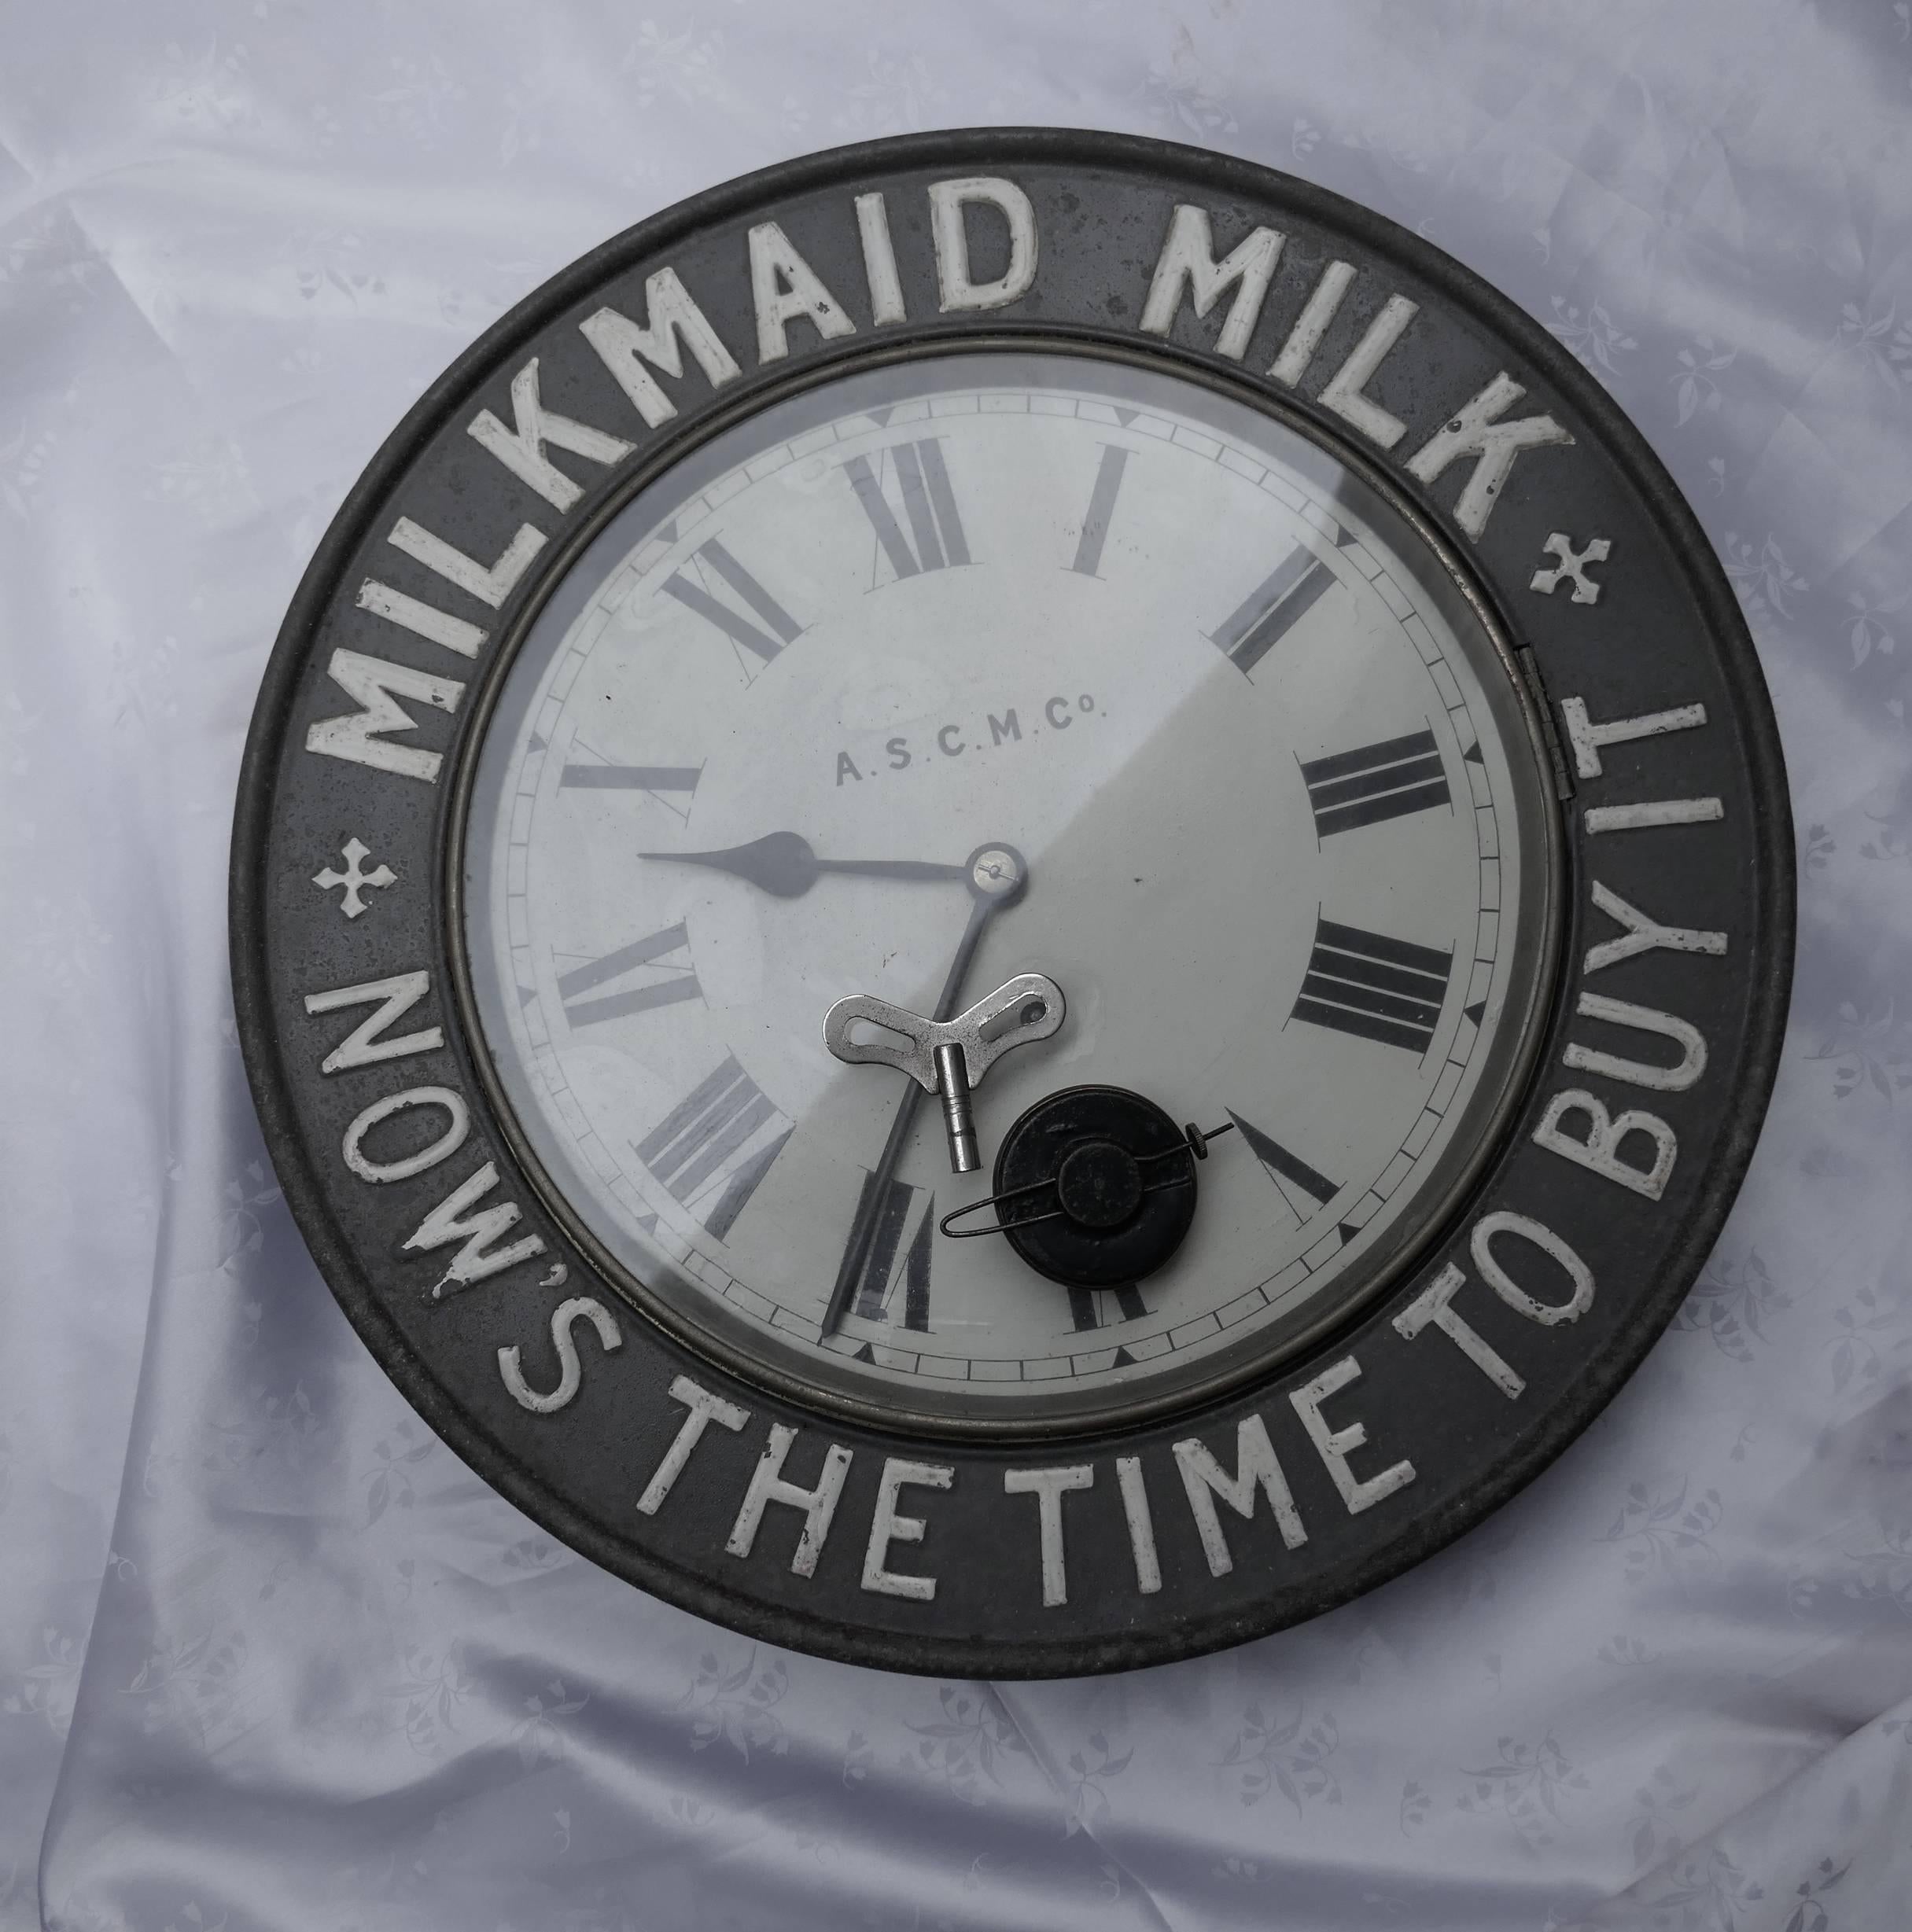 Original Mikmaid Milk Advertising Clock, from 1890 by the A.S.C.M Co 1